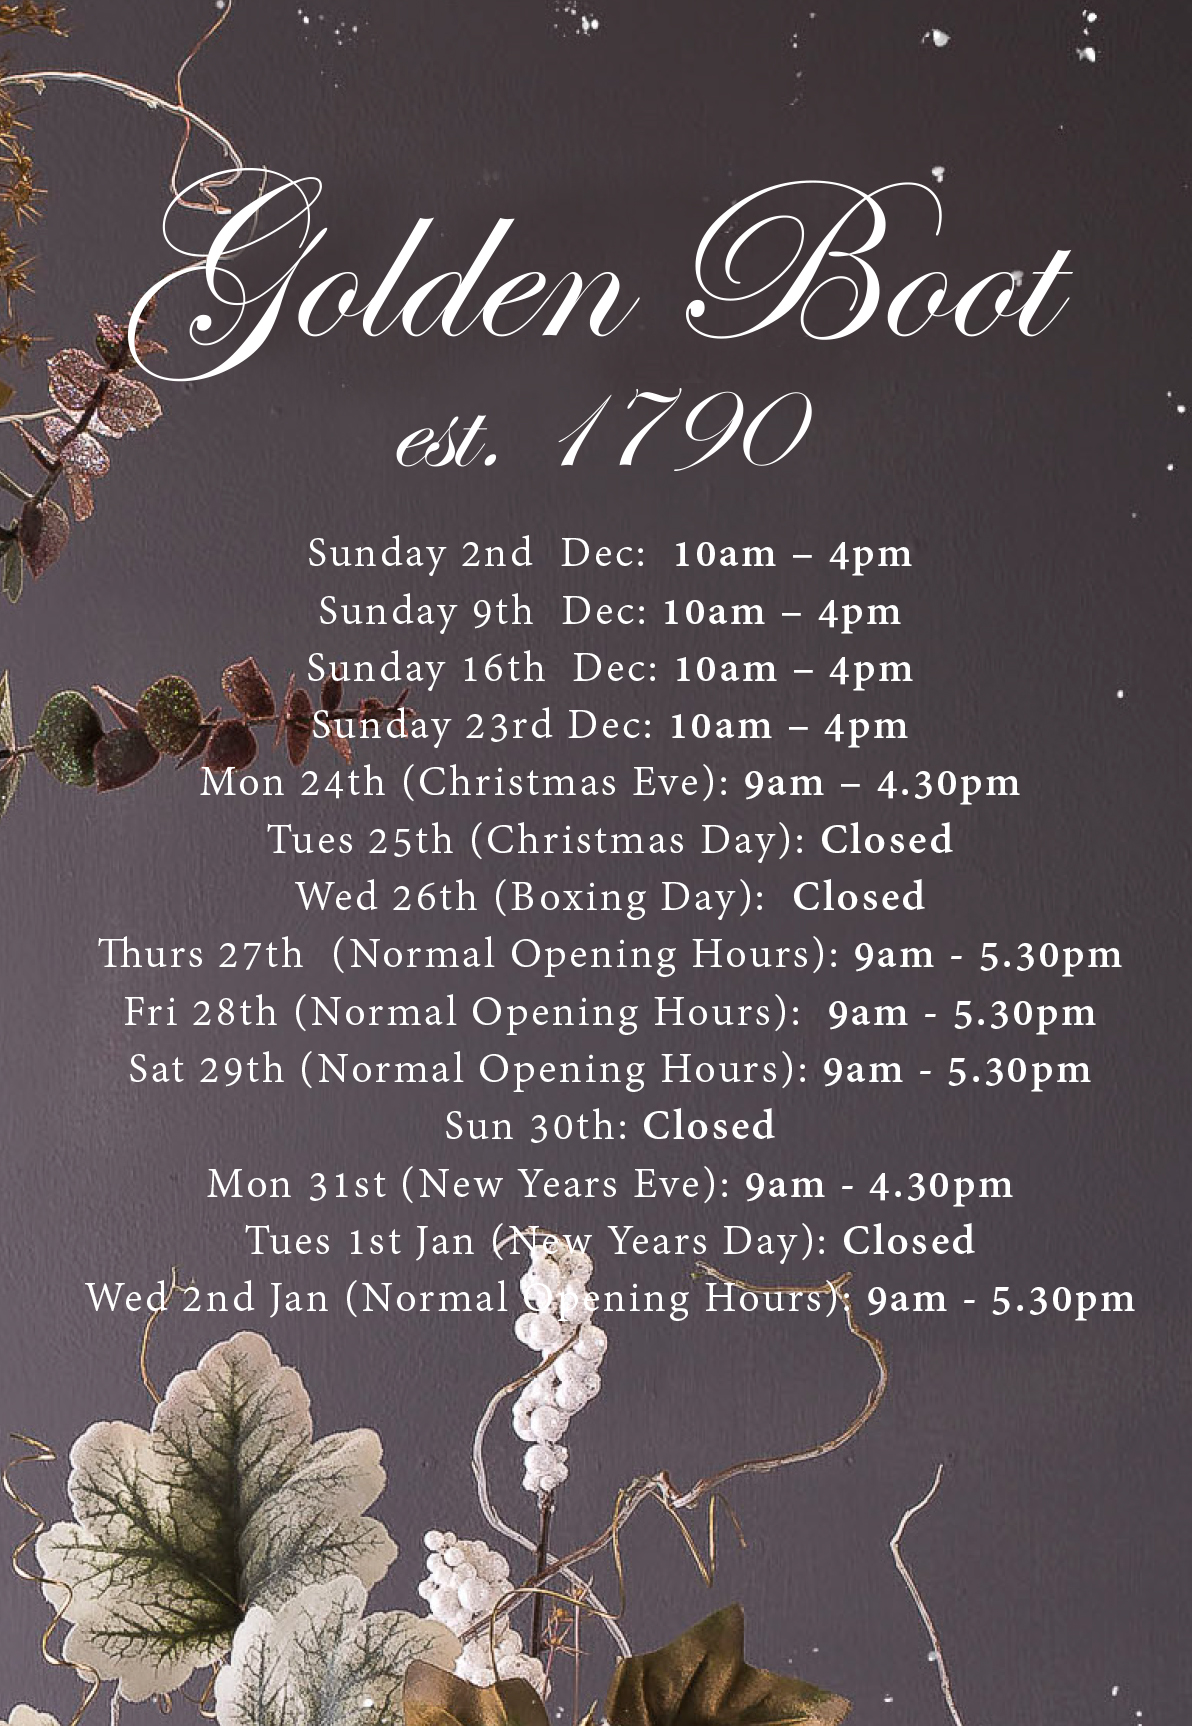 Golden Boot Christmas Opening Times